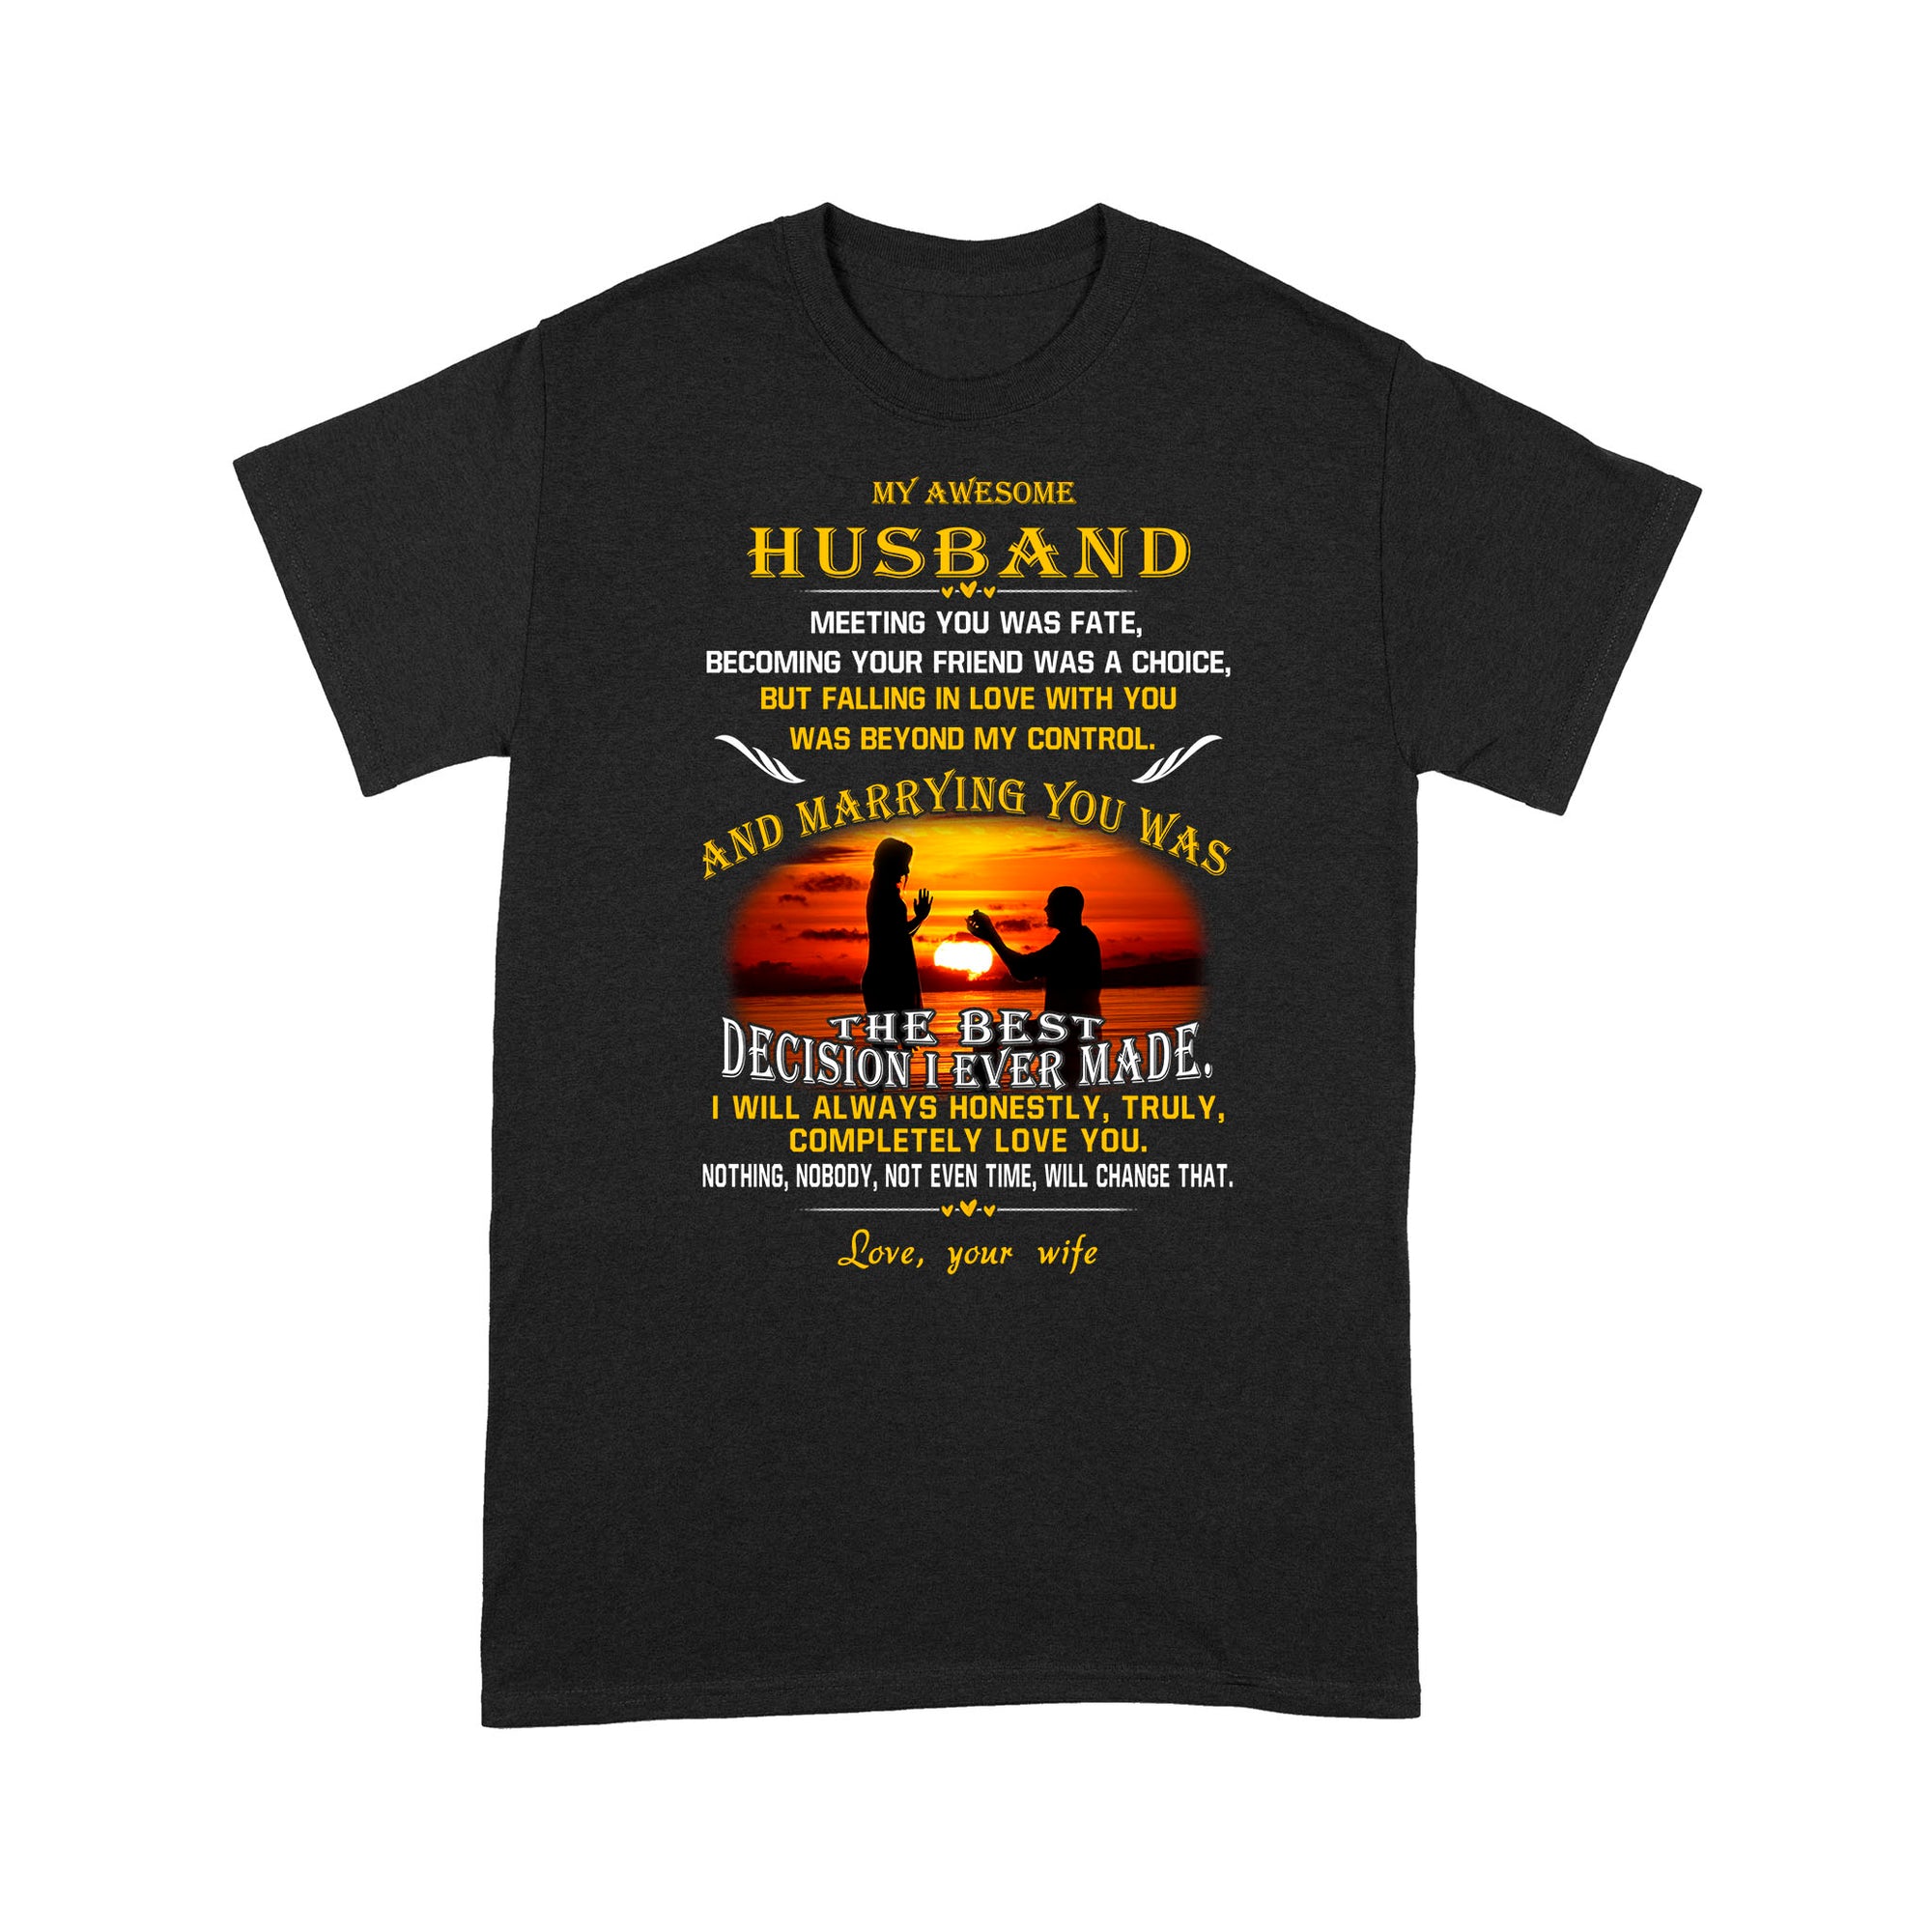 My Awesome Husband Meeting You Was Fate Becoming Your Friend Was A Choice - Standard T-Shirt